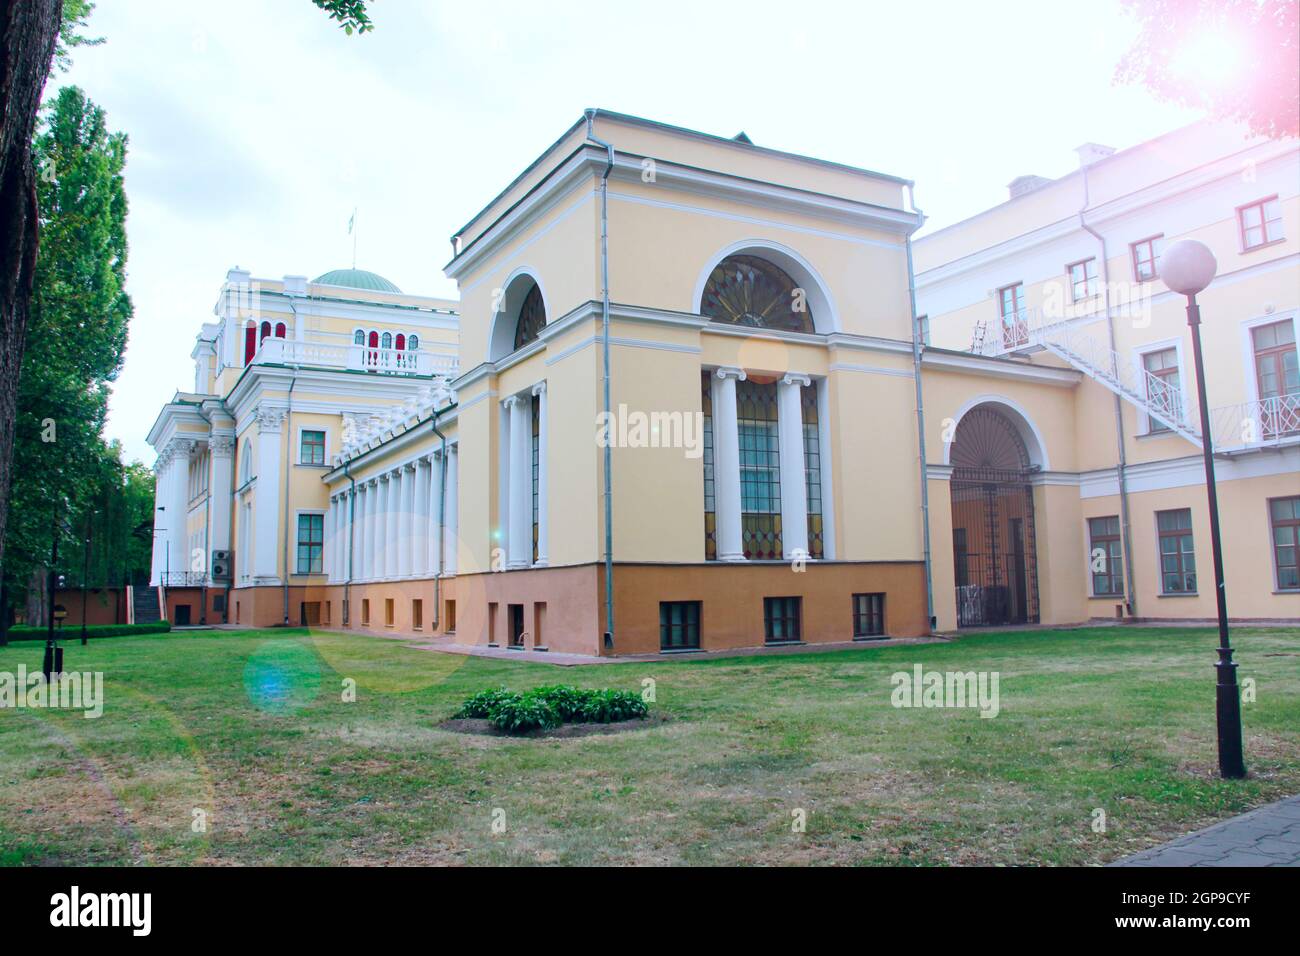 The Rumyantsev-Paskevich Residence in Gomel side view. Palace of Rumyantsev-Paskevich. Architectural ensemble with a park. Building with white columns Stock Photo